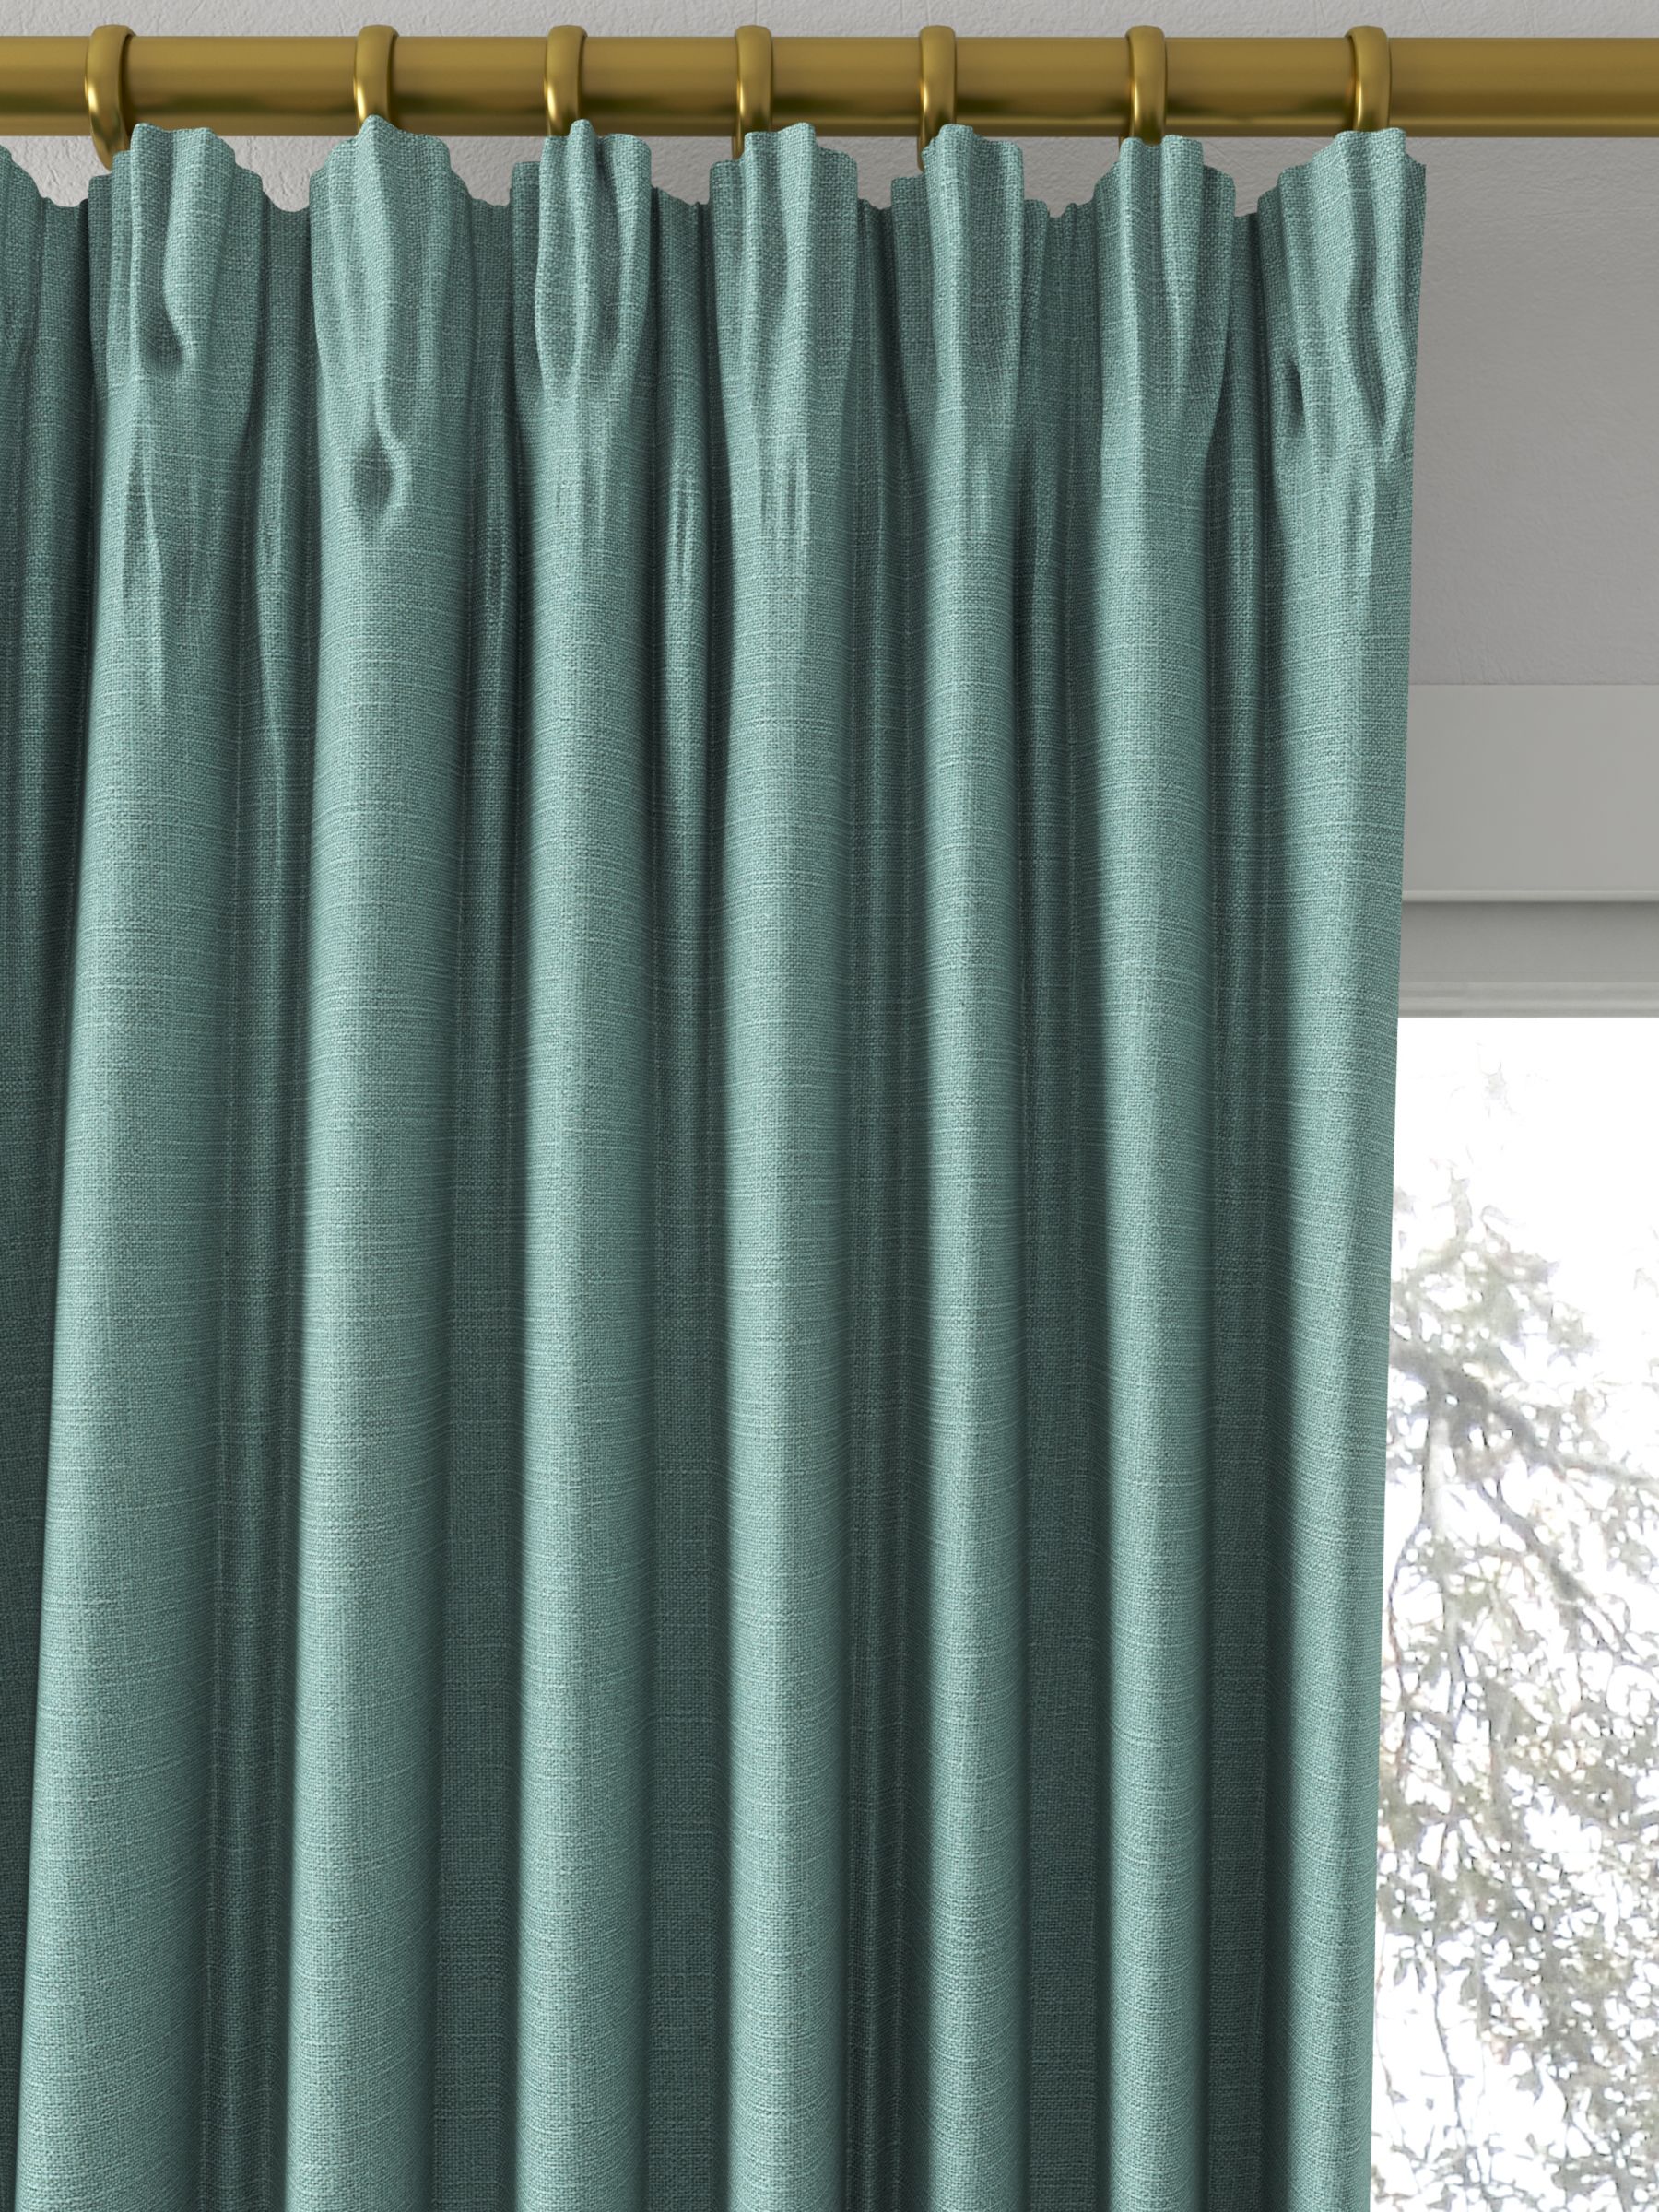 Sanderson Tuscany II Made to Measure Curtains, Duck Egg